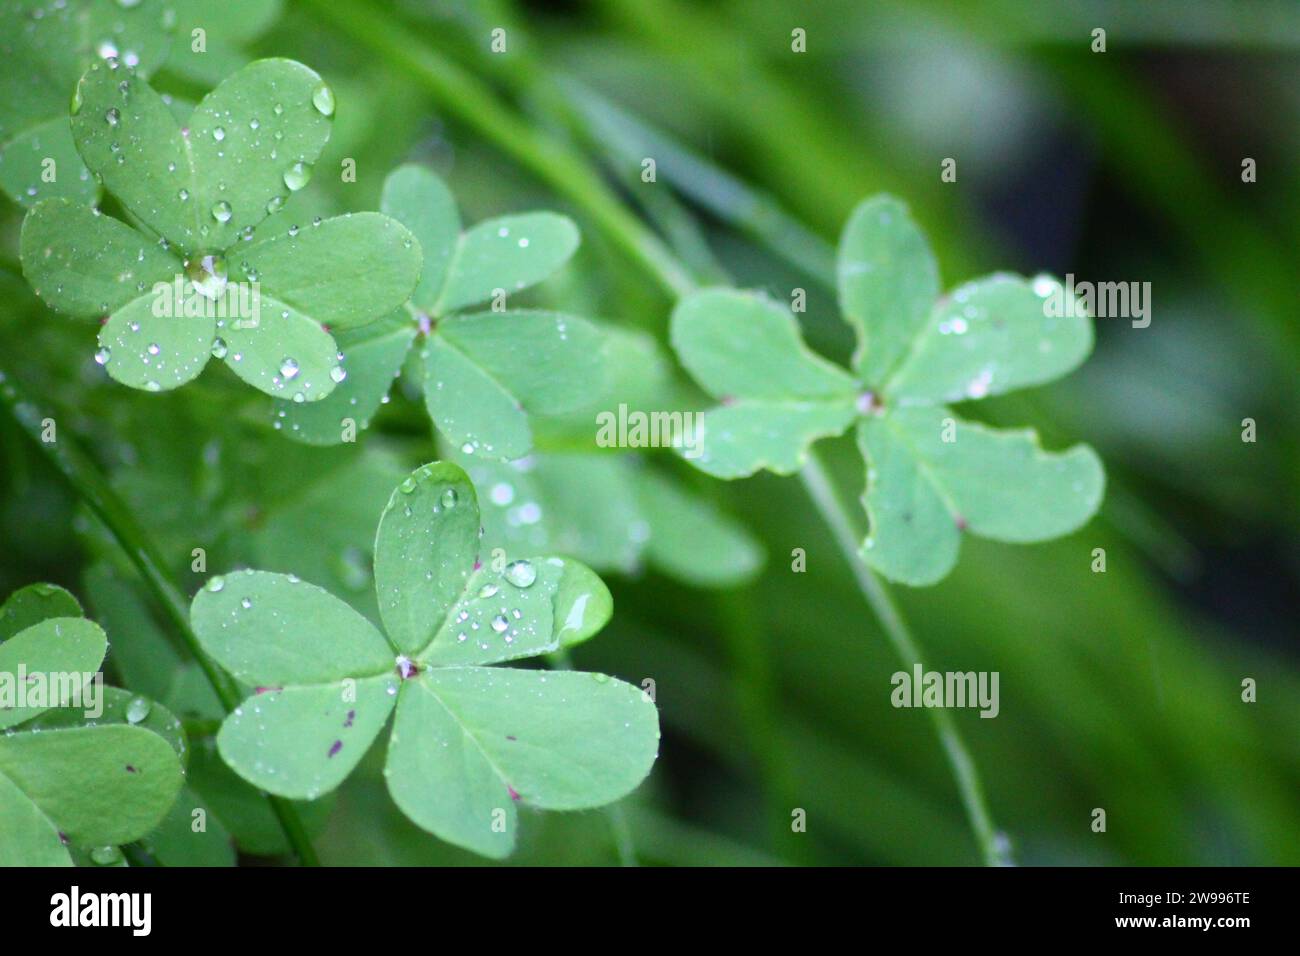 A close-up shot of a lush green clover plant with glistening water droplets resting on its leaves Stock Photo